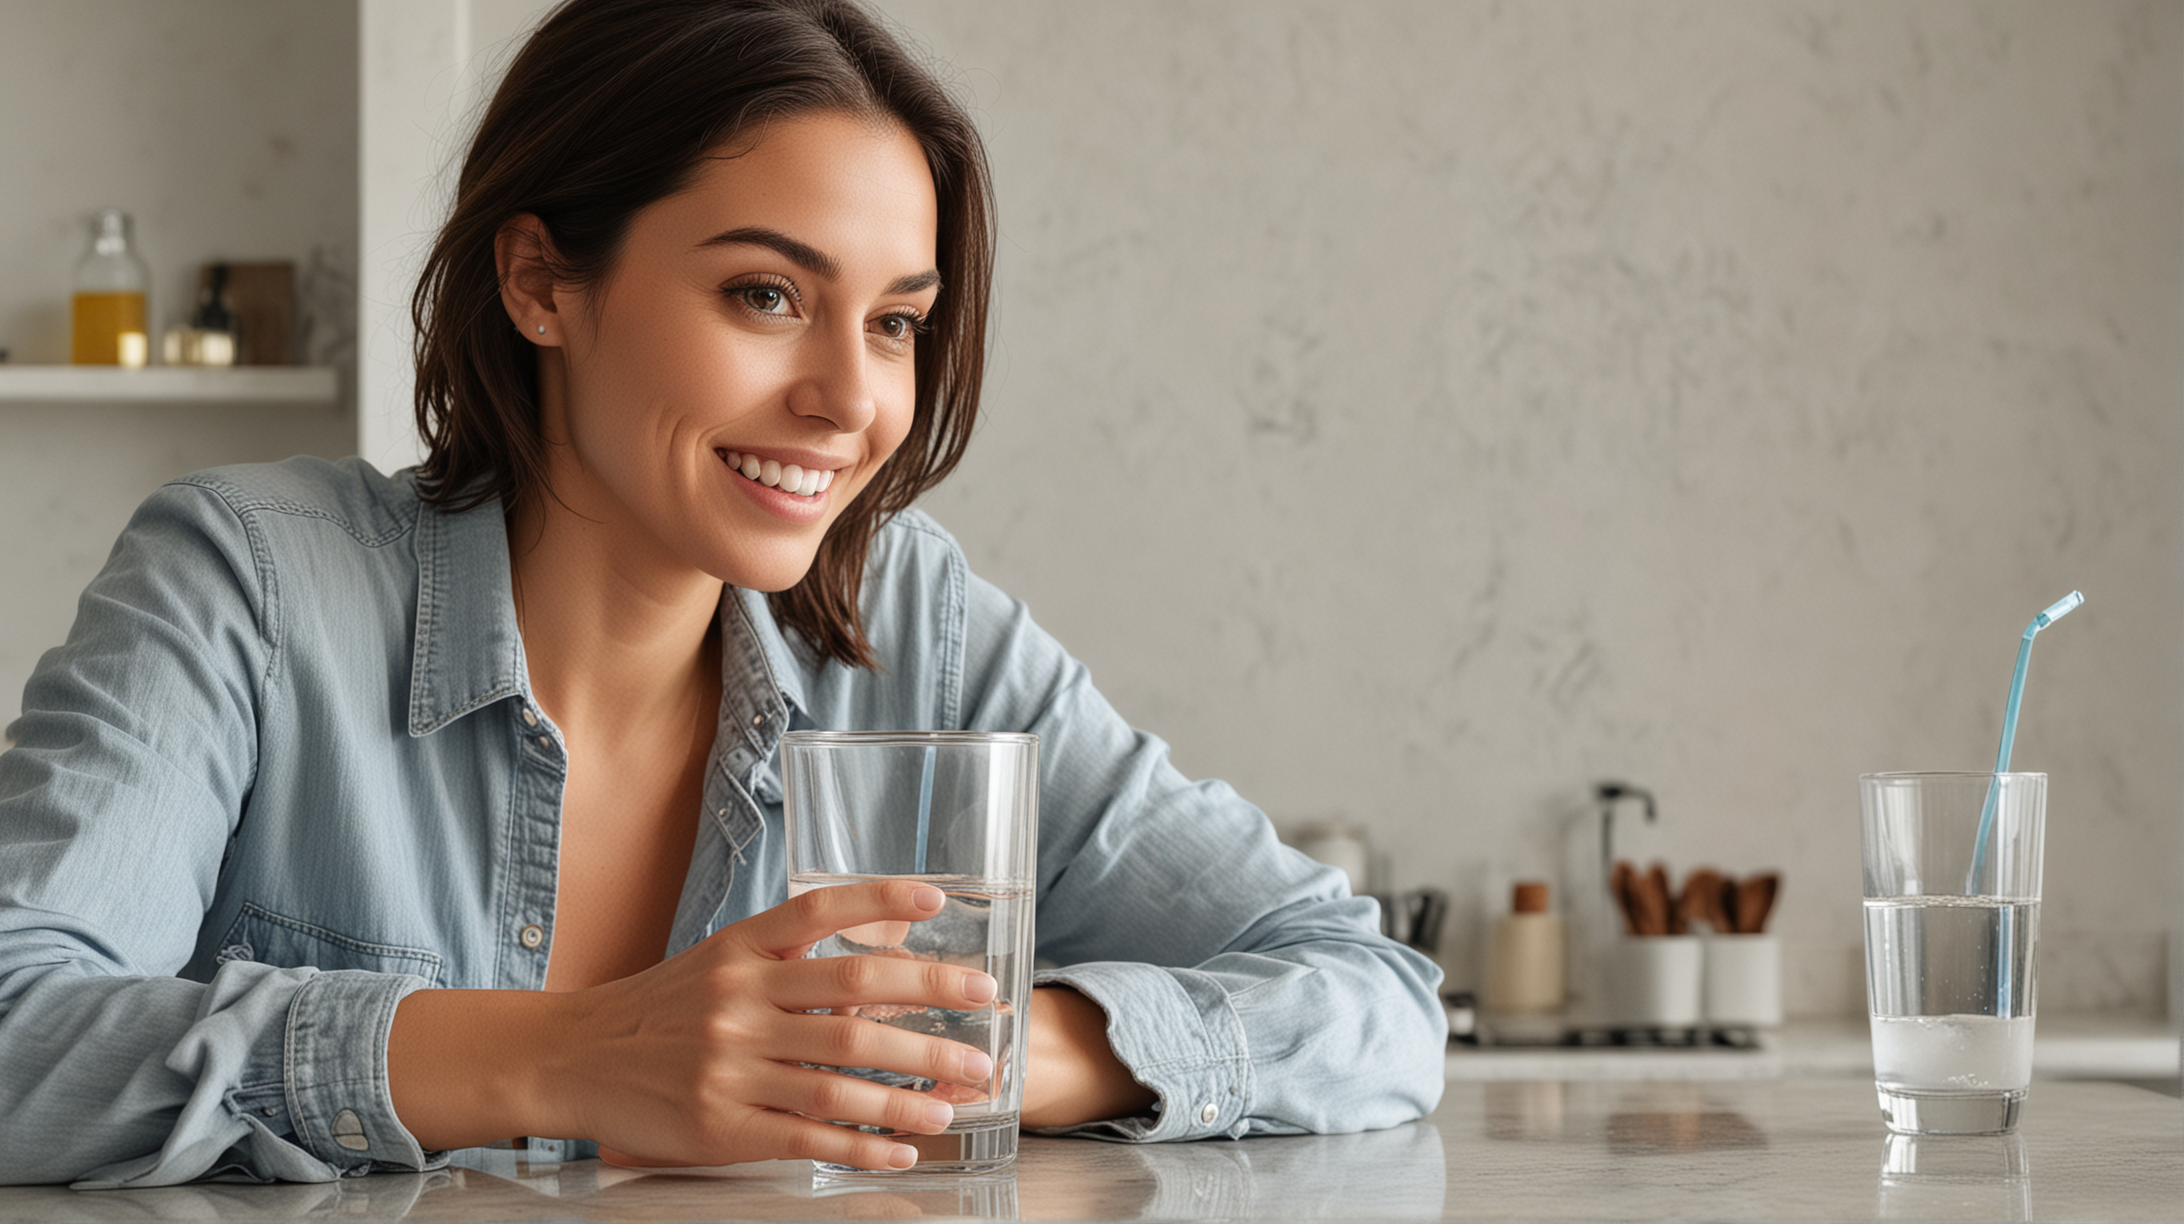 Woman with Glass of Water on Kitchen Counter